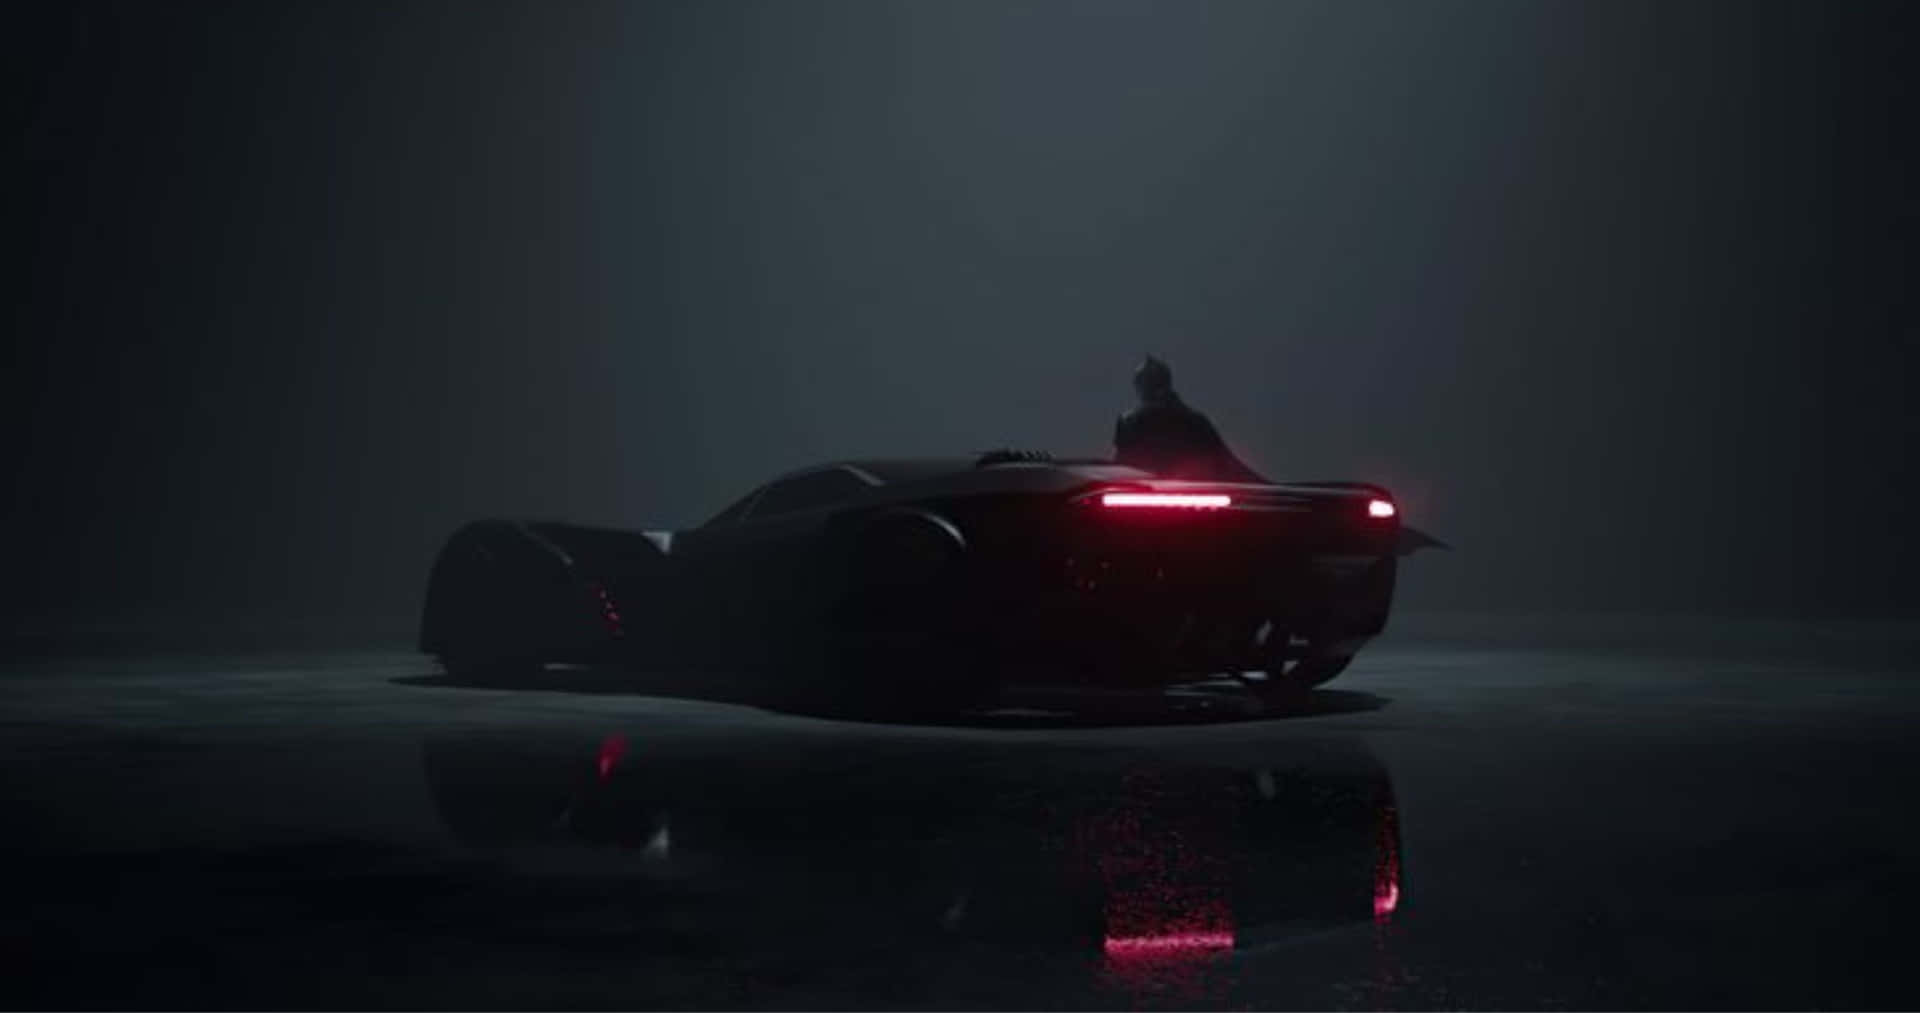 Check out this amazing 4K Batmobile